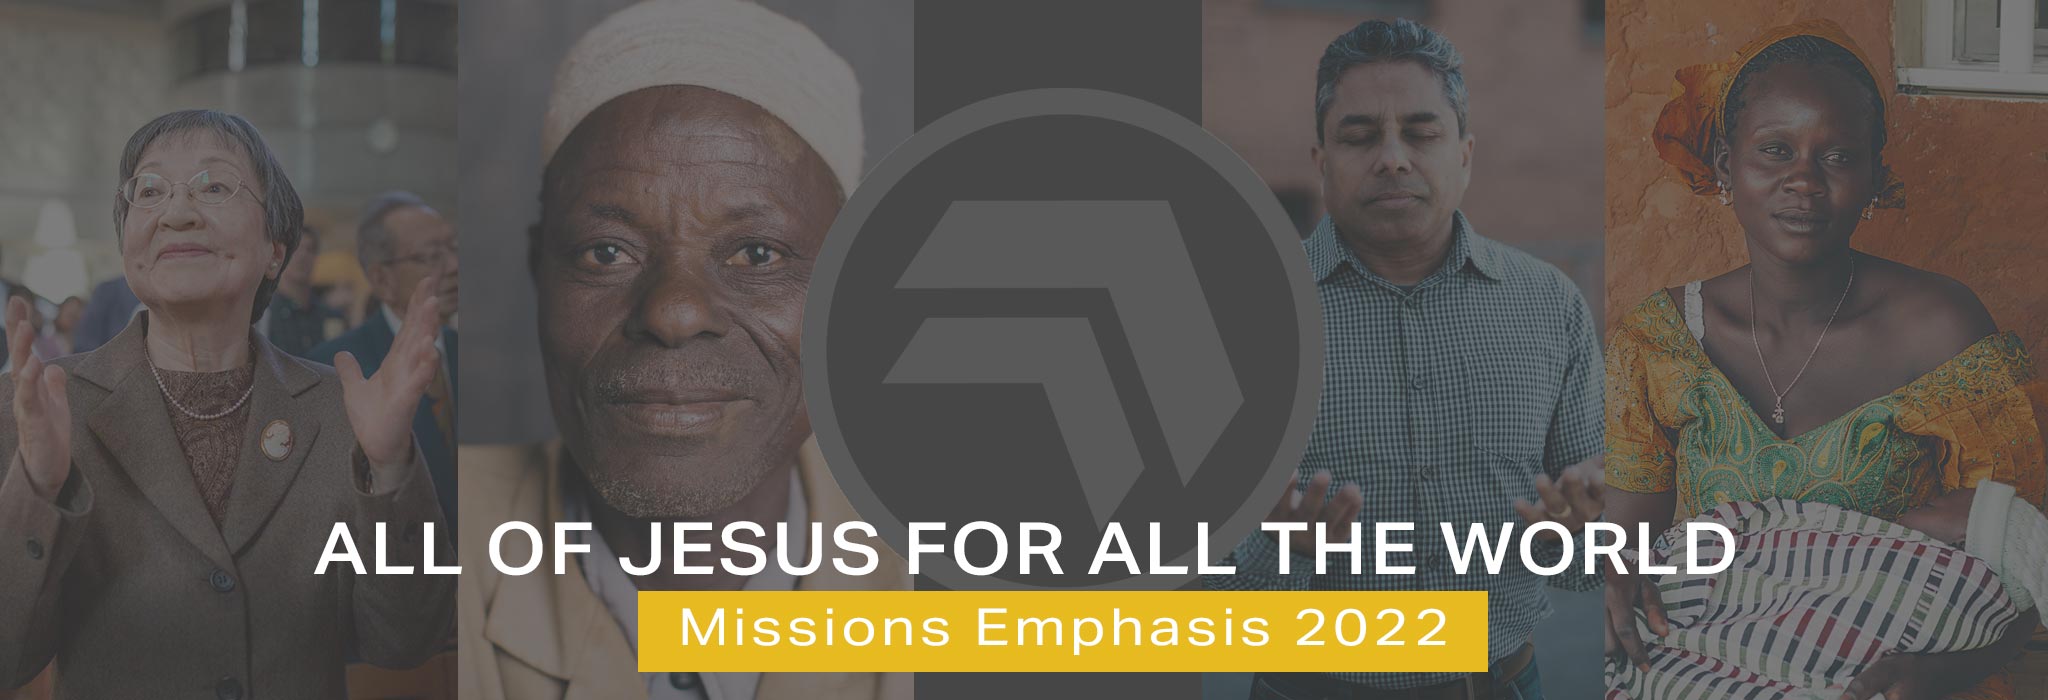 Missions Emphasis 2022